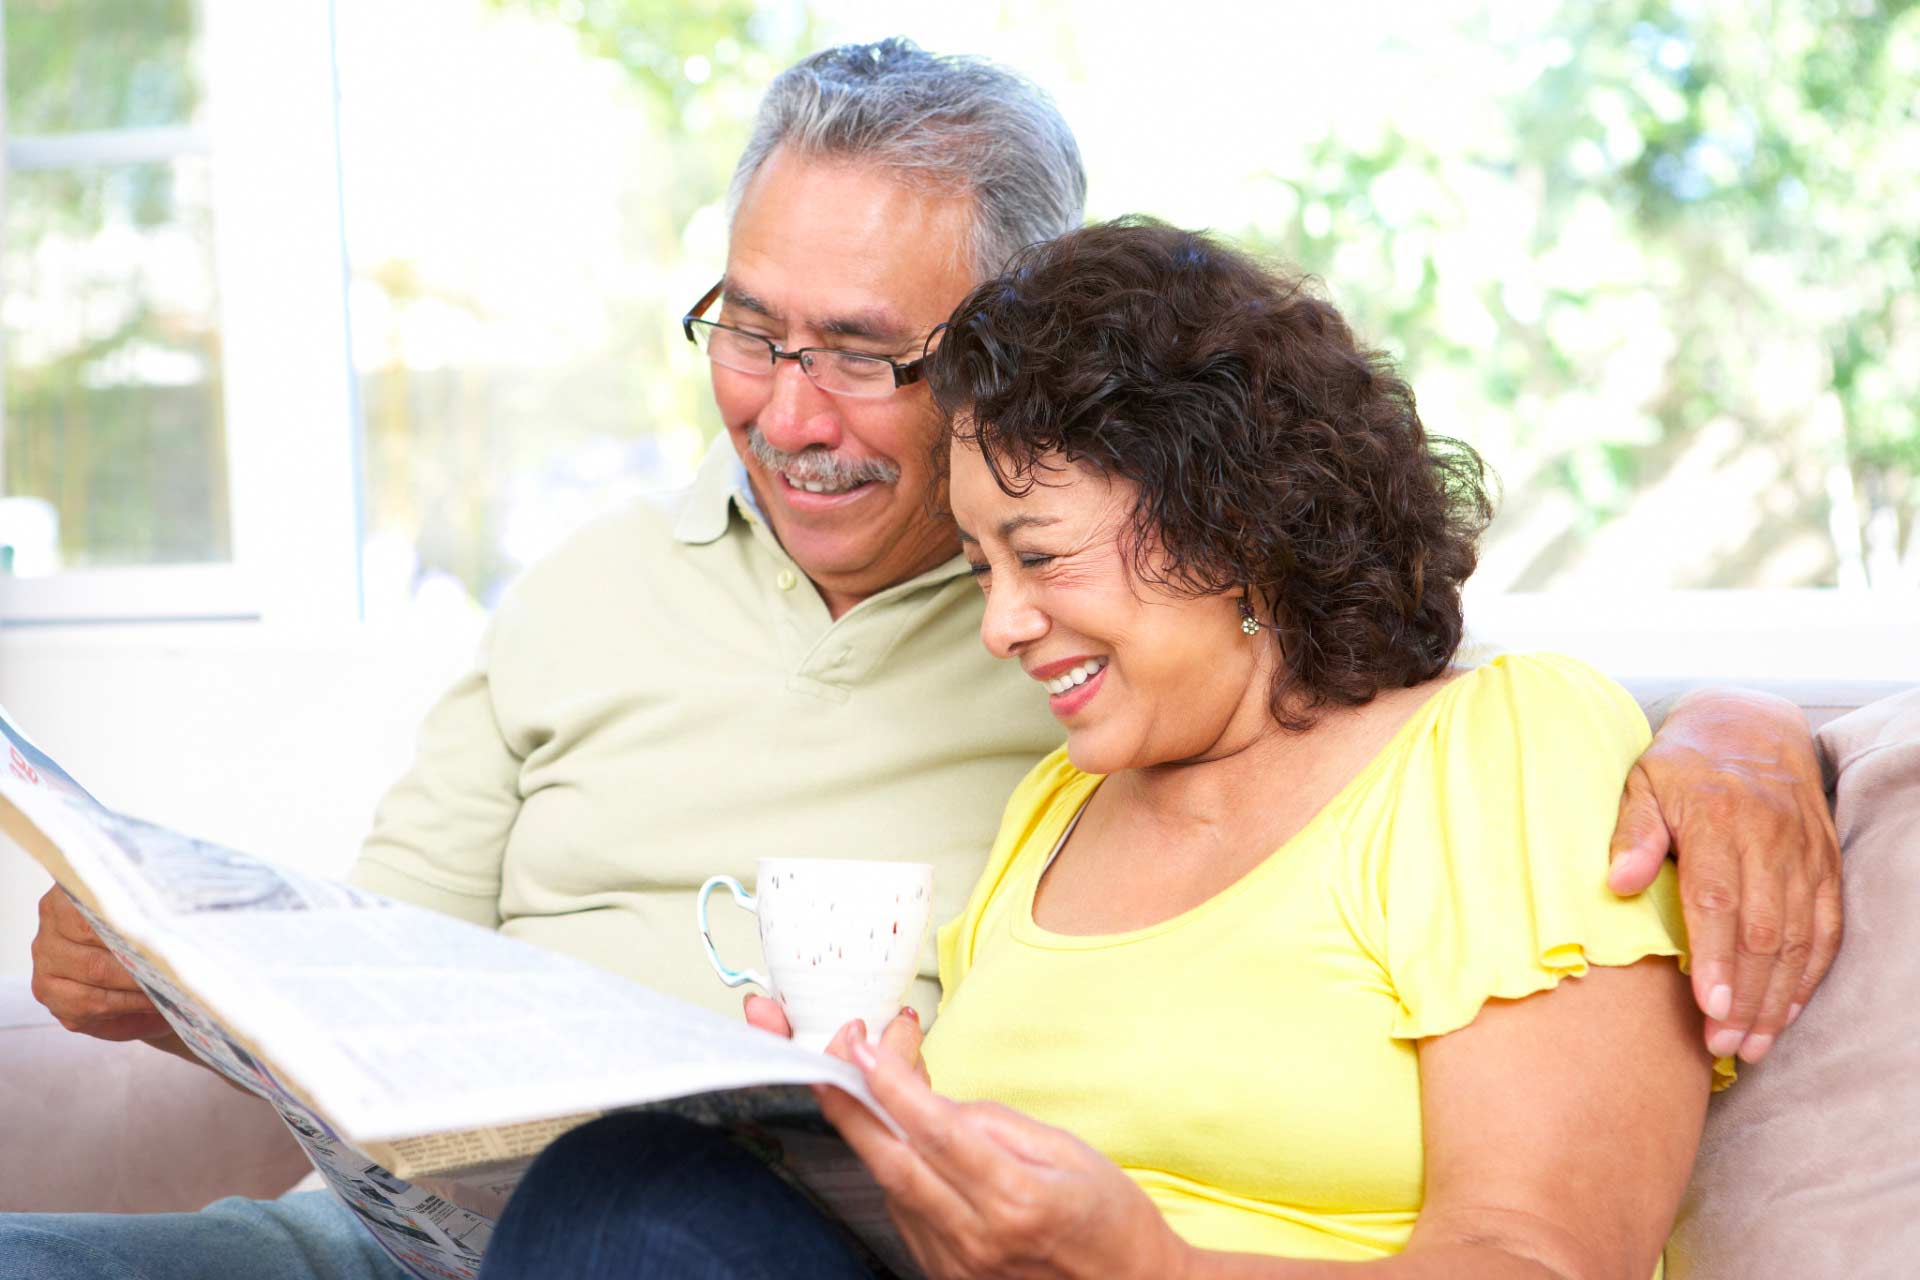 Smiling older Latino couple sits together on a sunny afternoon, reading the newspaper.